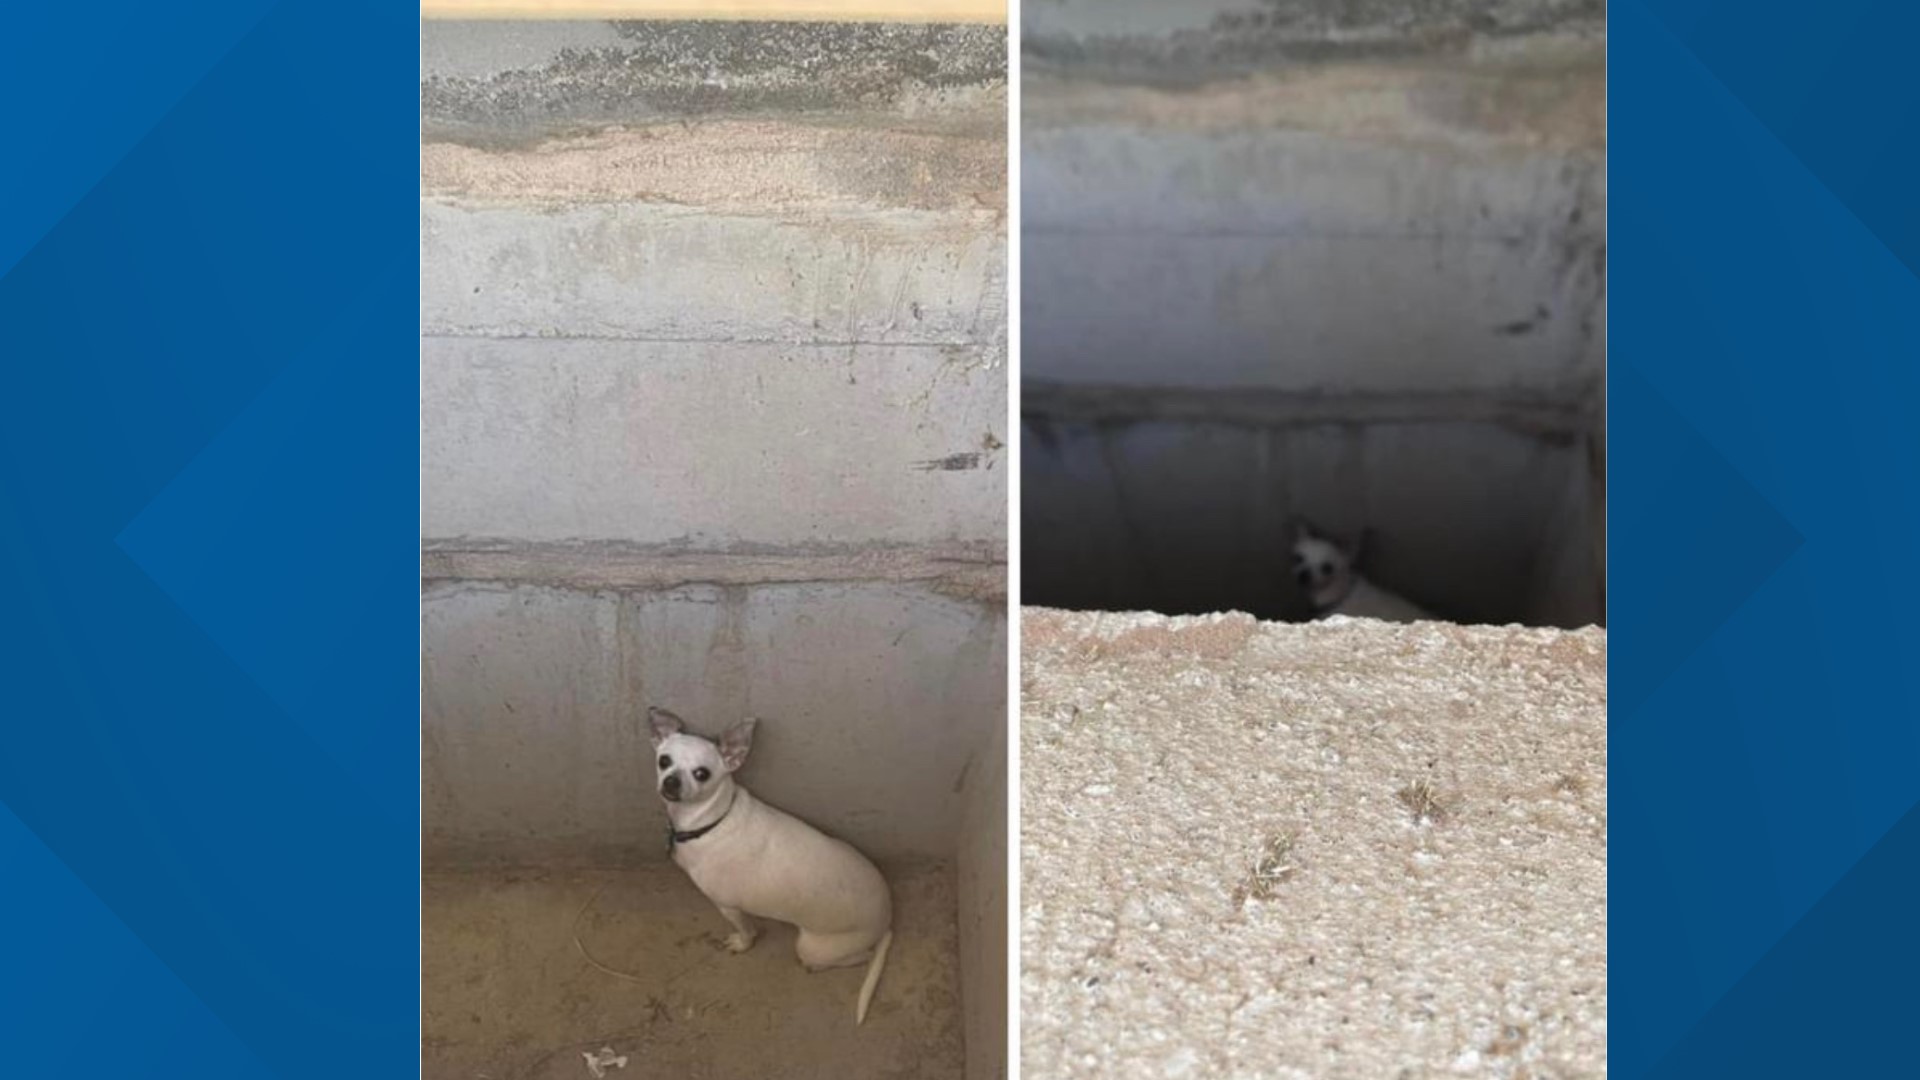 Thanks to the power of social media, the Yzarra family was able to find and rescue their dog that got stuck in a storm drain.